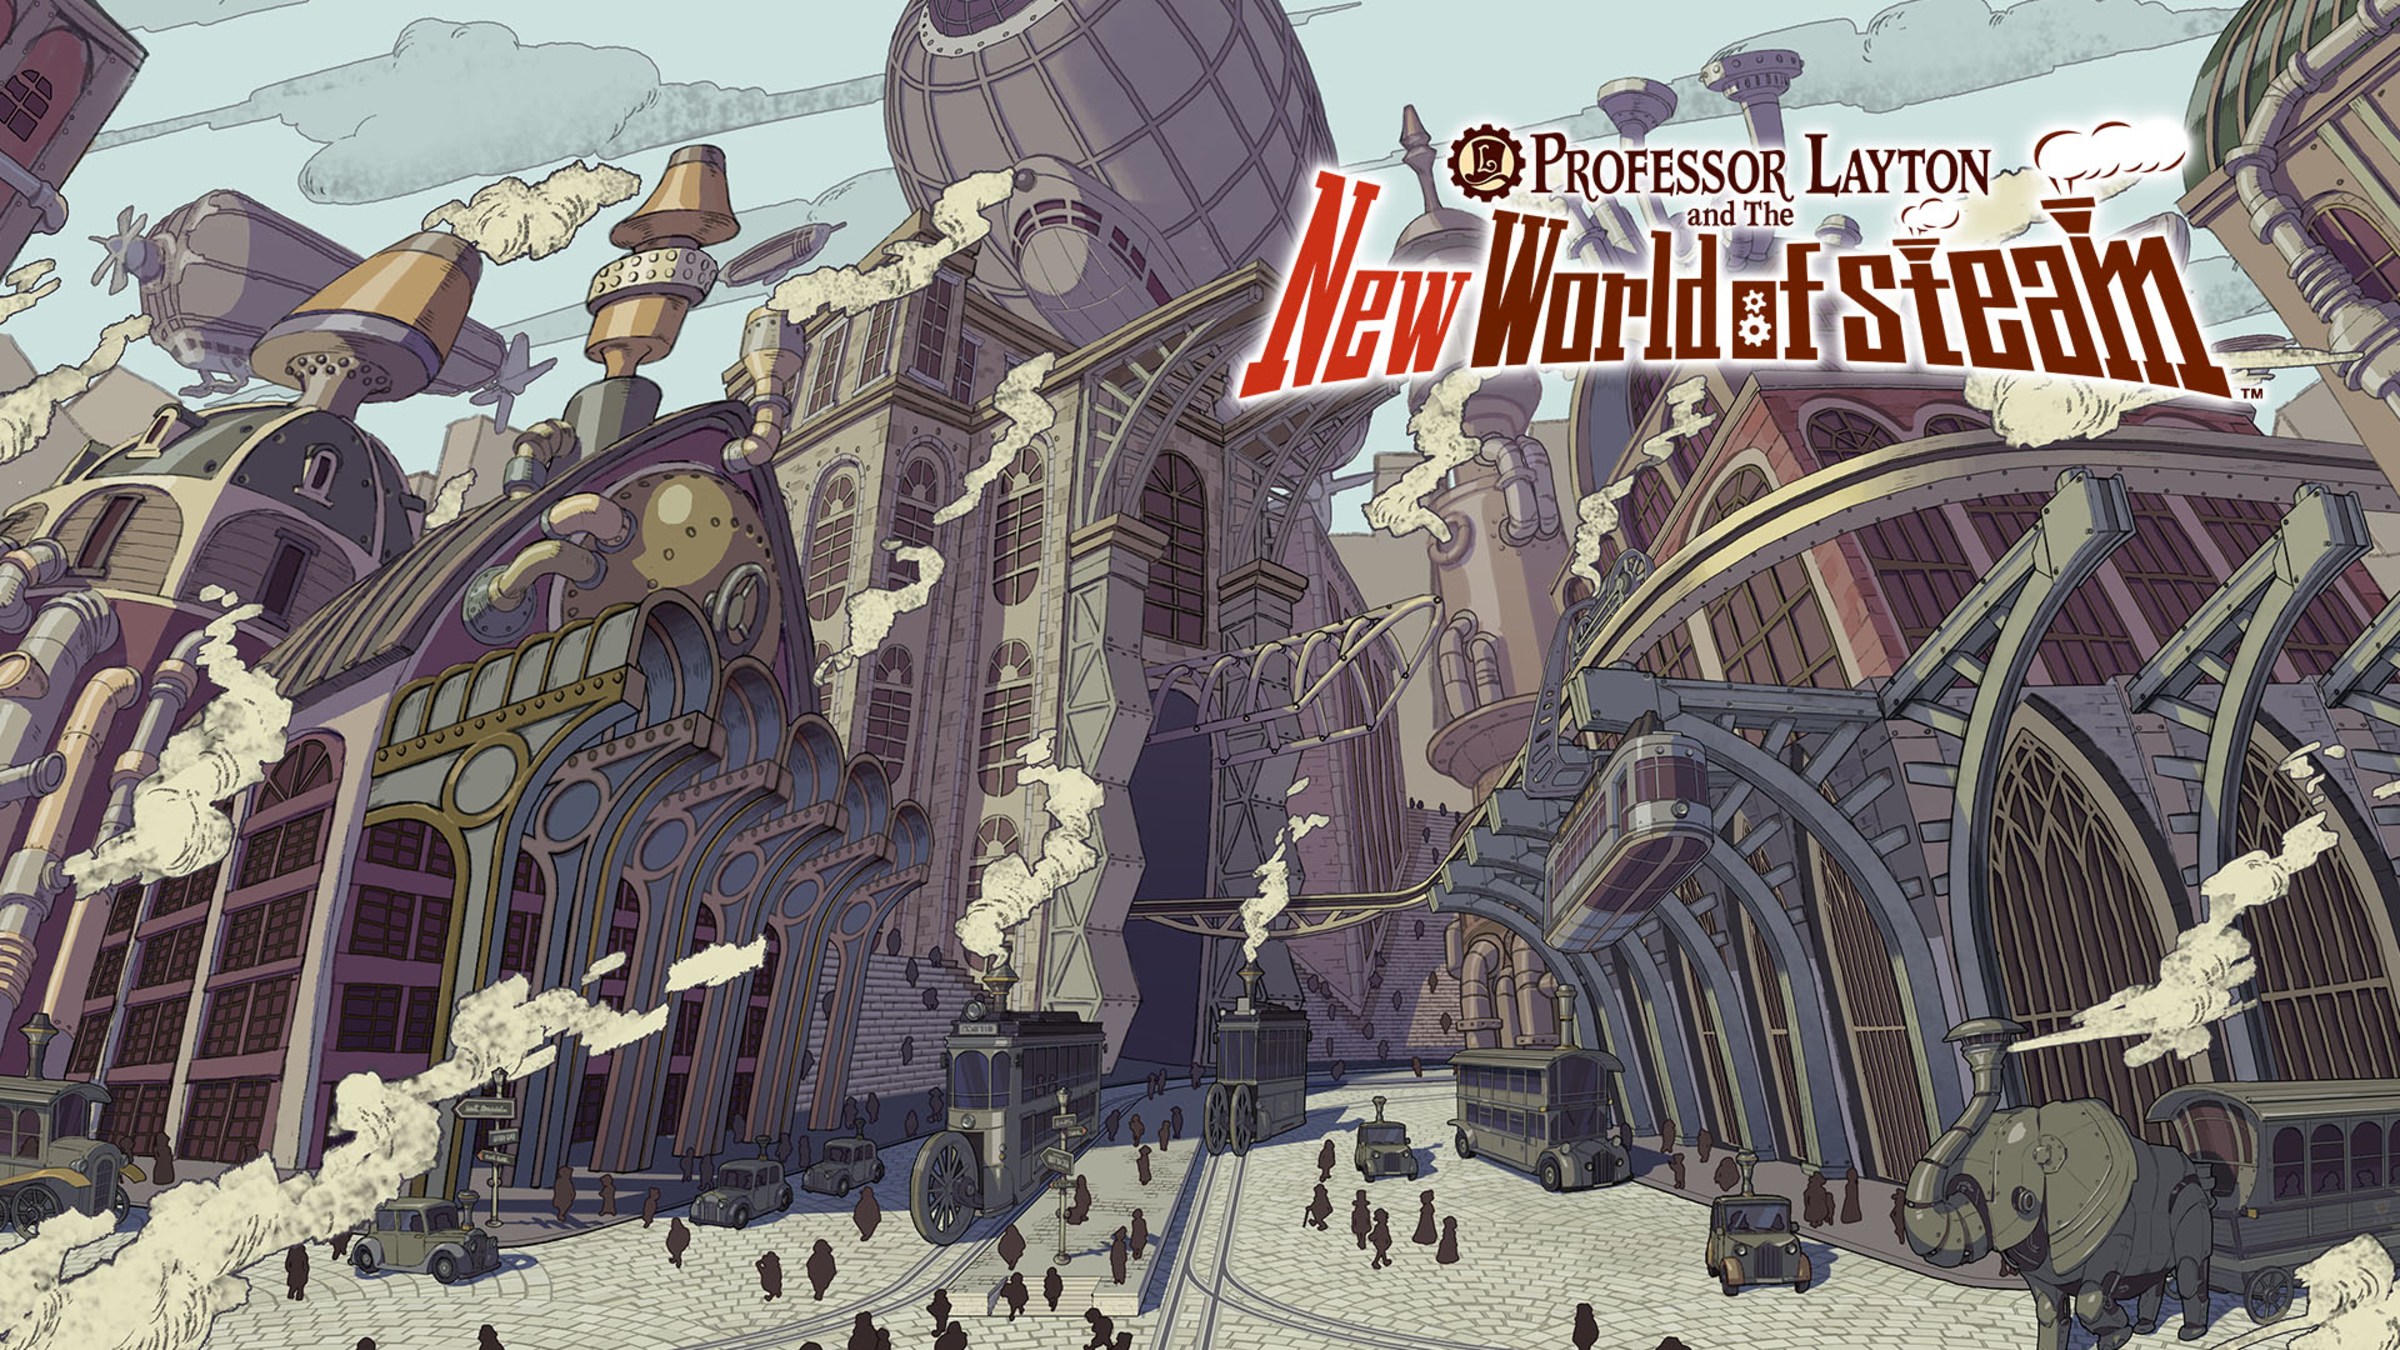 Professor Layton and The New World of steam for Nintendo Switch - Nintendo  Official Site